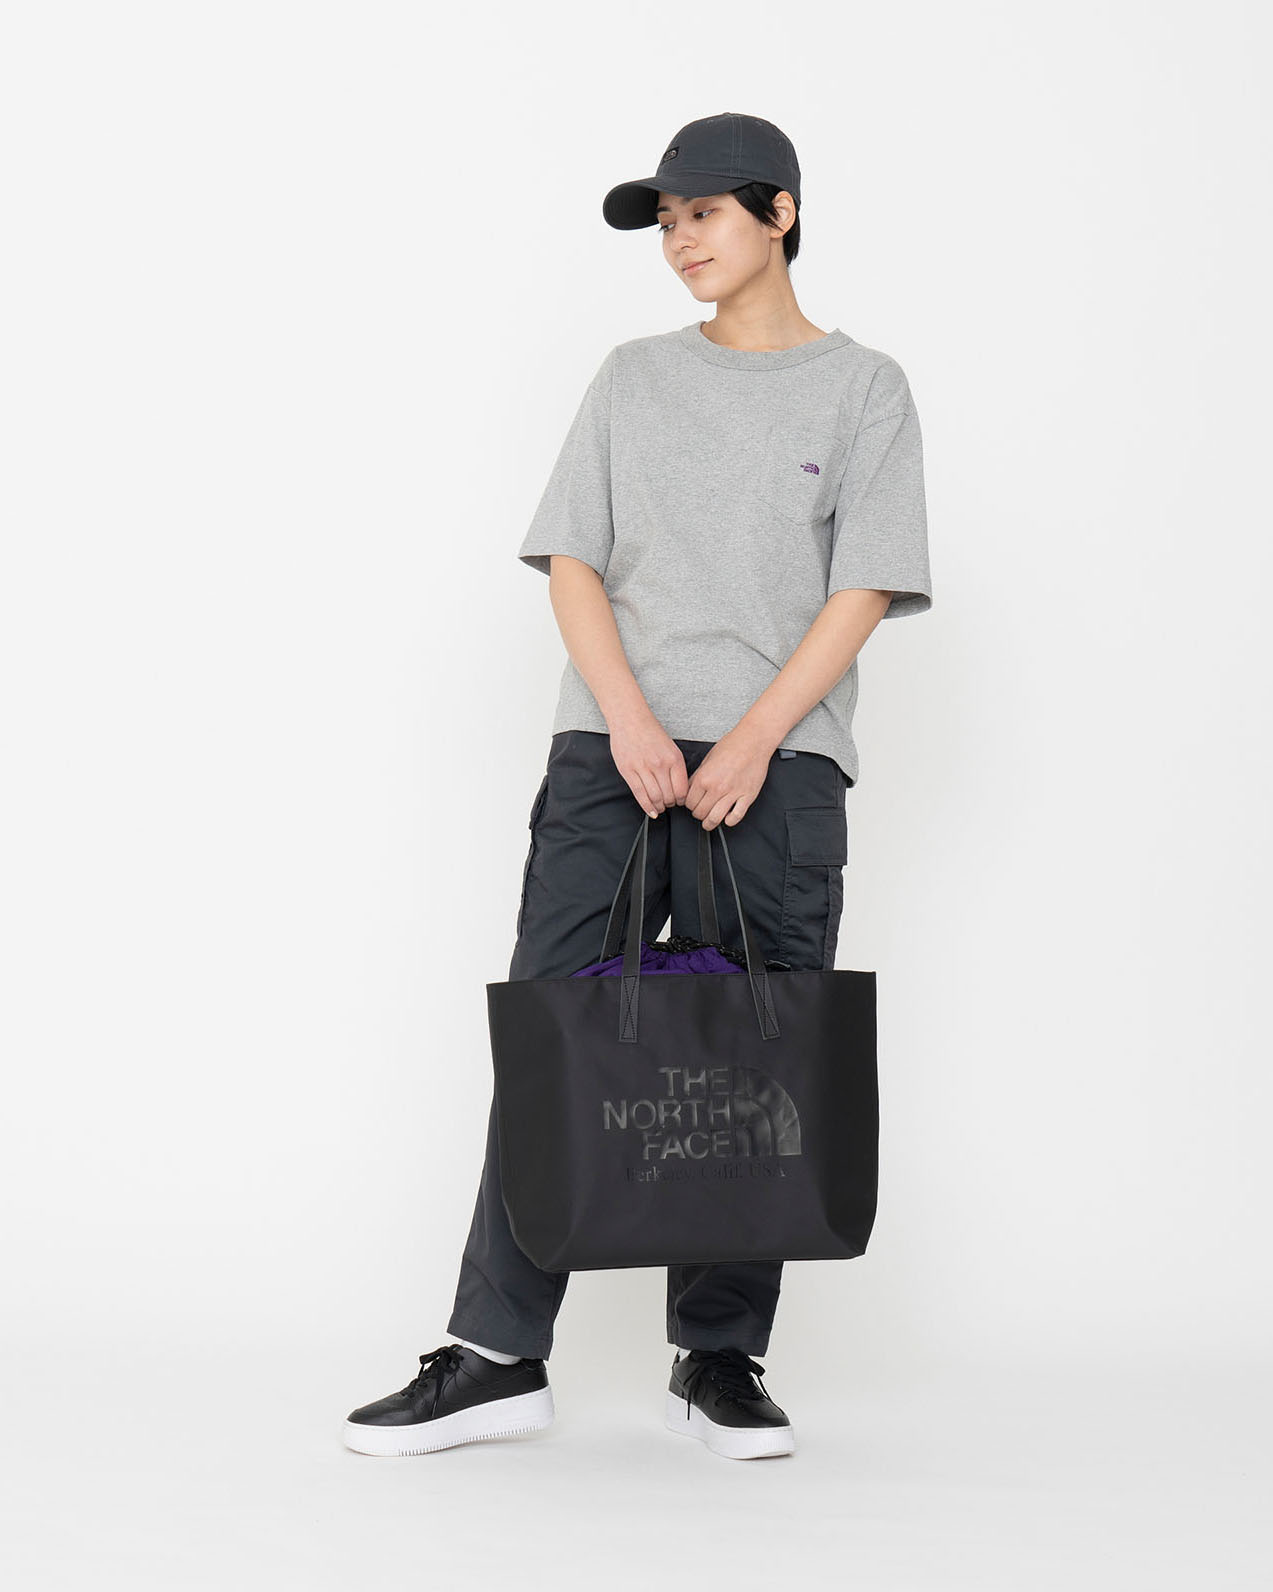 The North Face Purple Label's FW22 Bag Collection Is Unbeatable